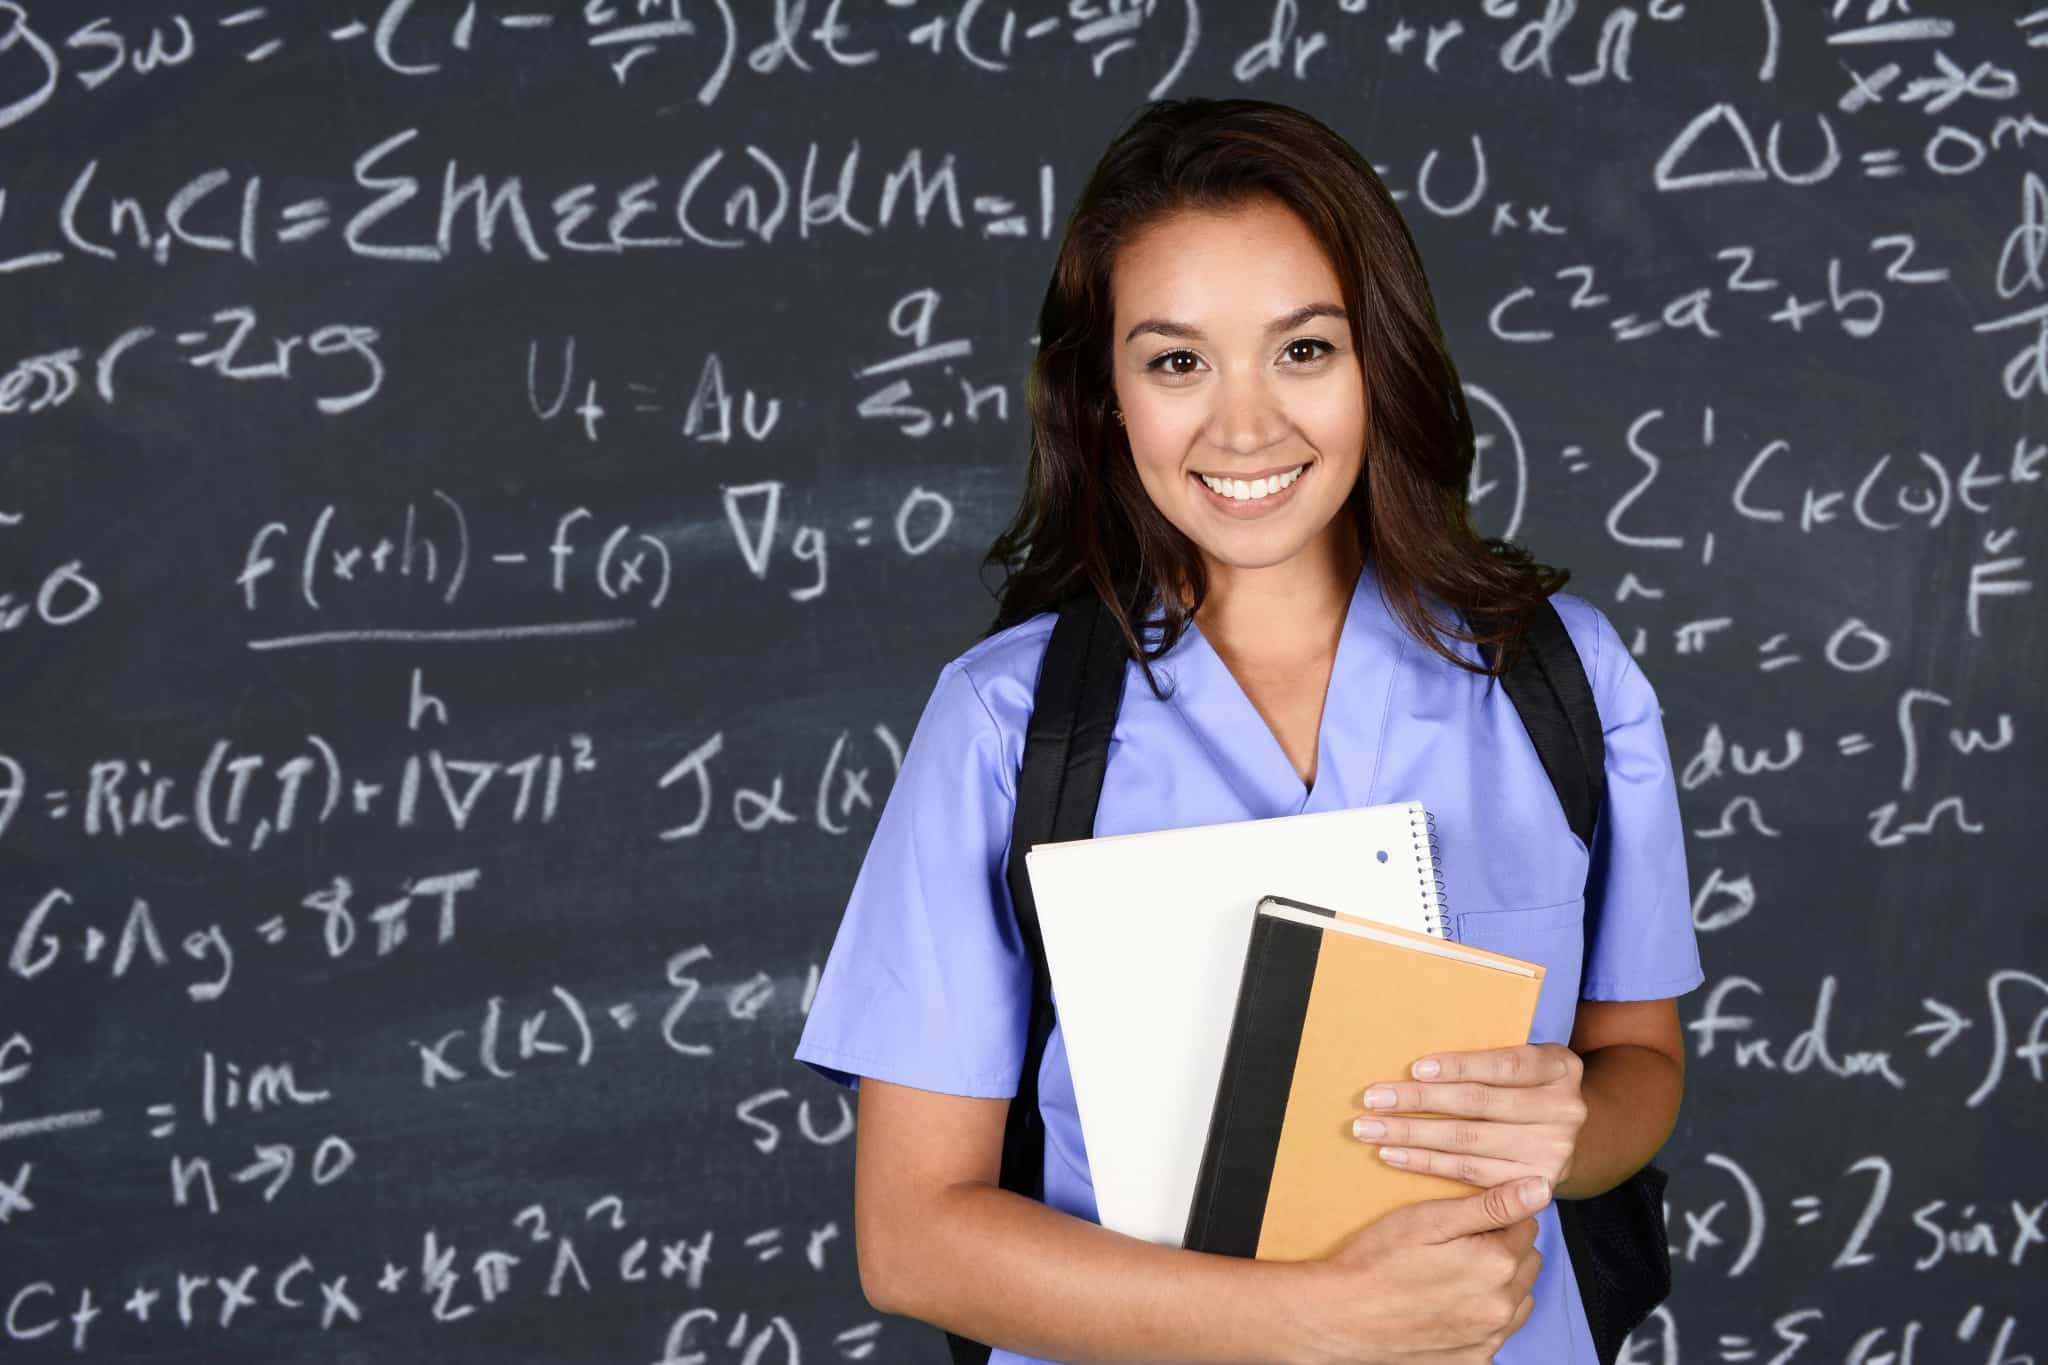 Medical student in front of a blackboard